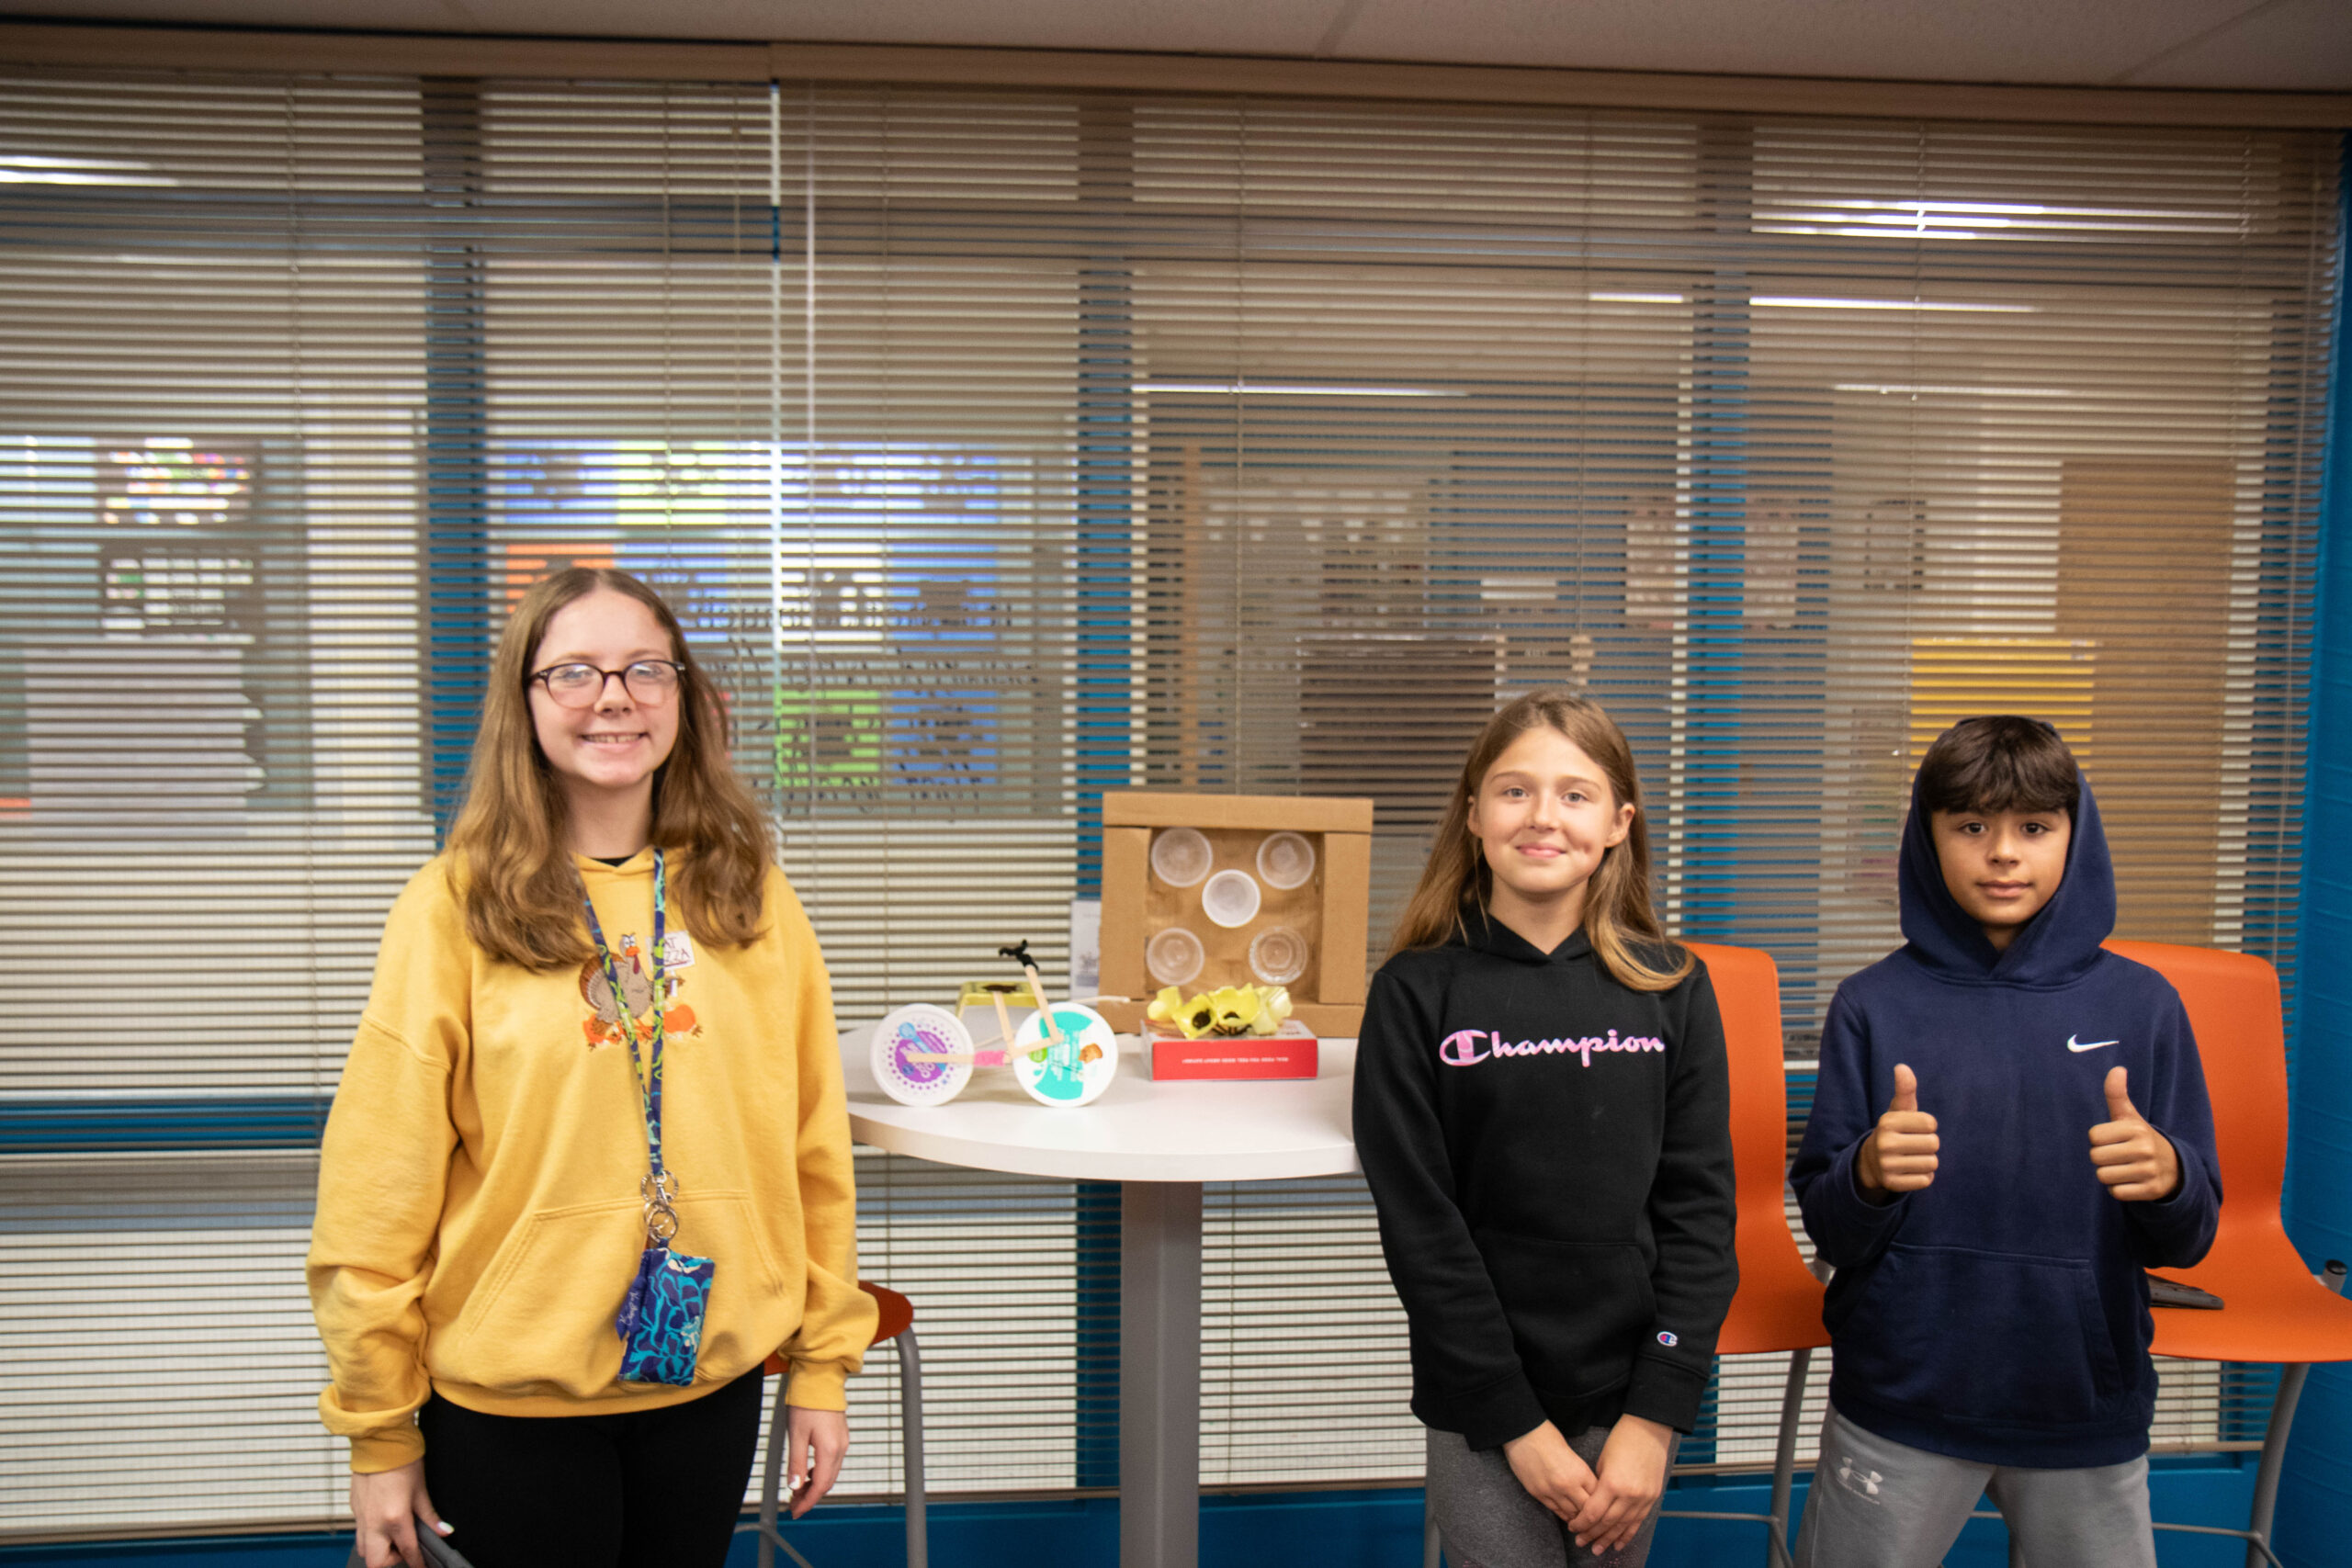 6th Graders Take Their Creativity to Space